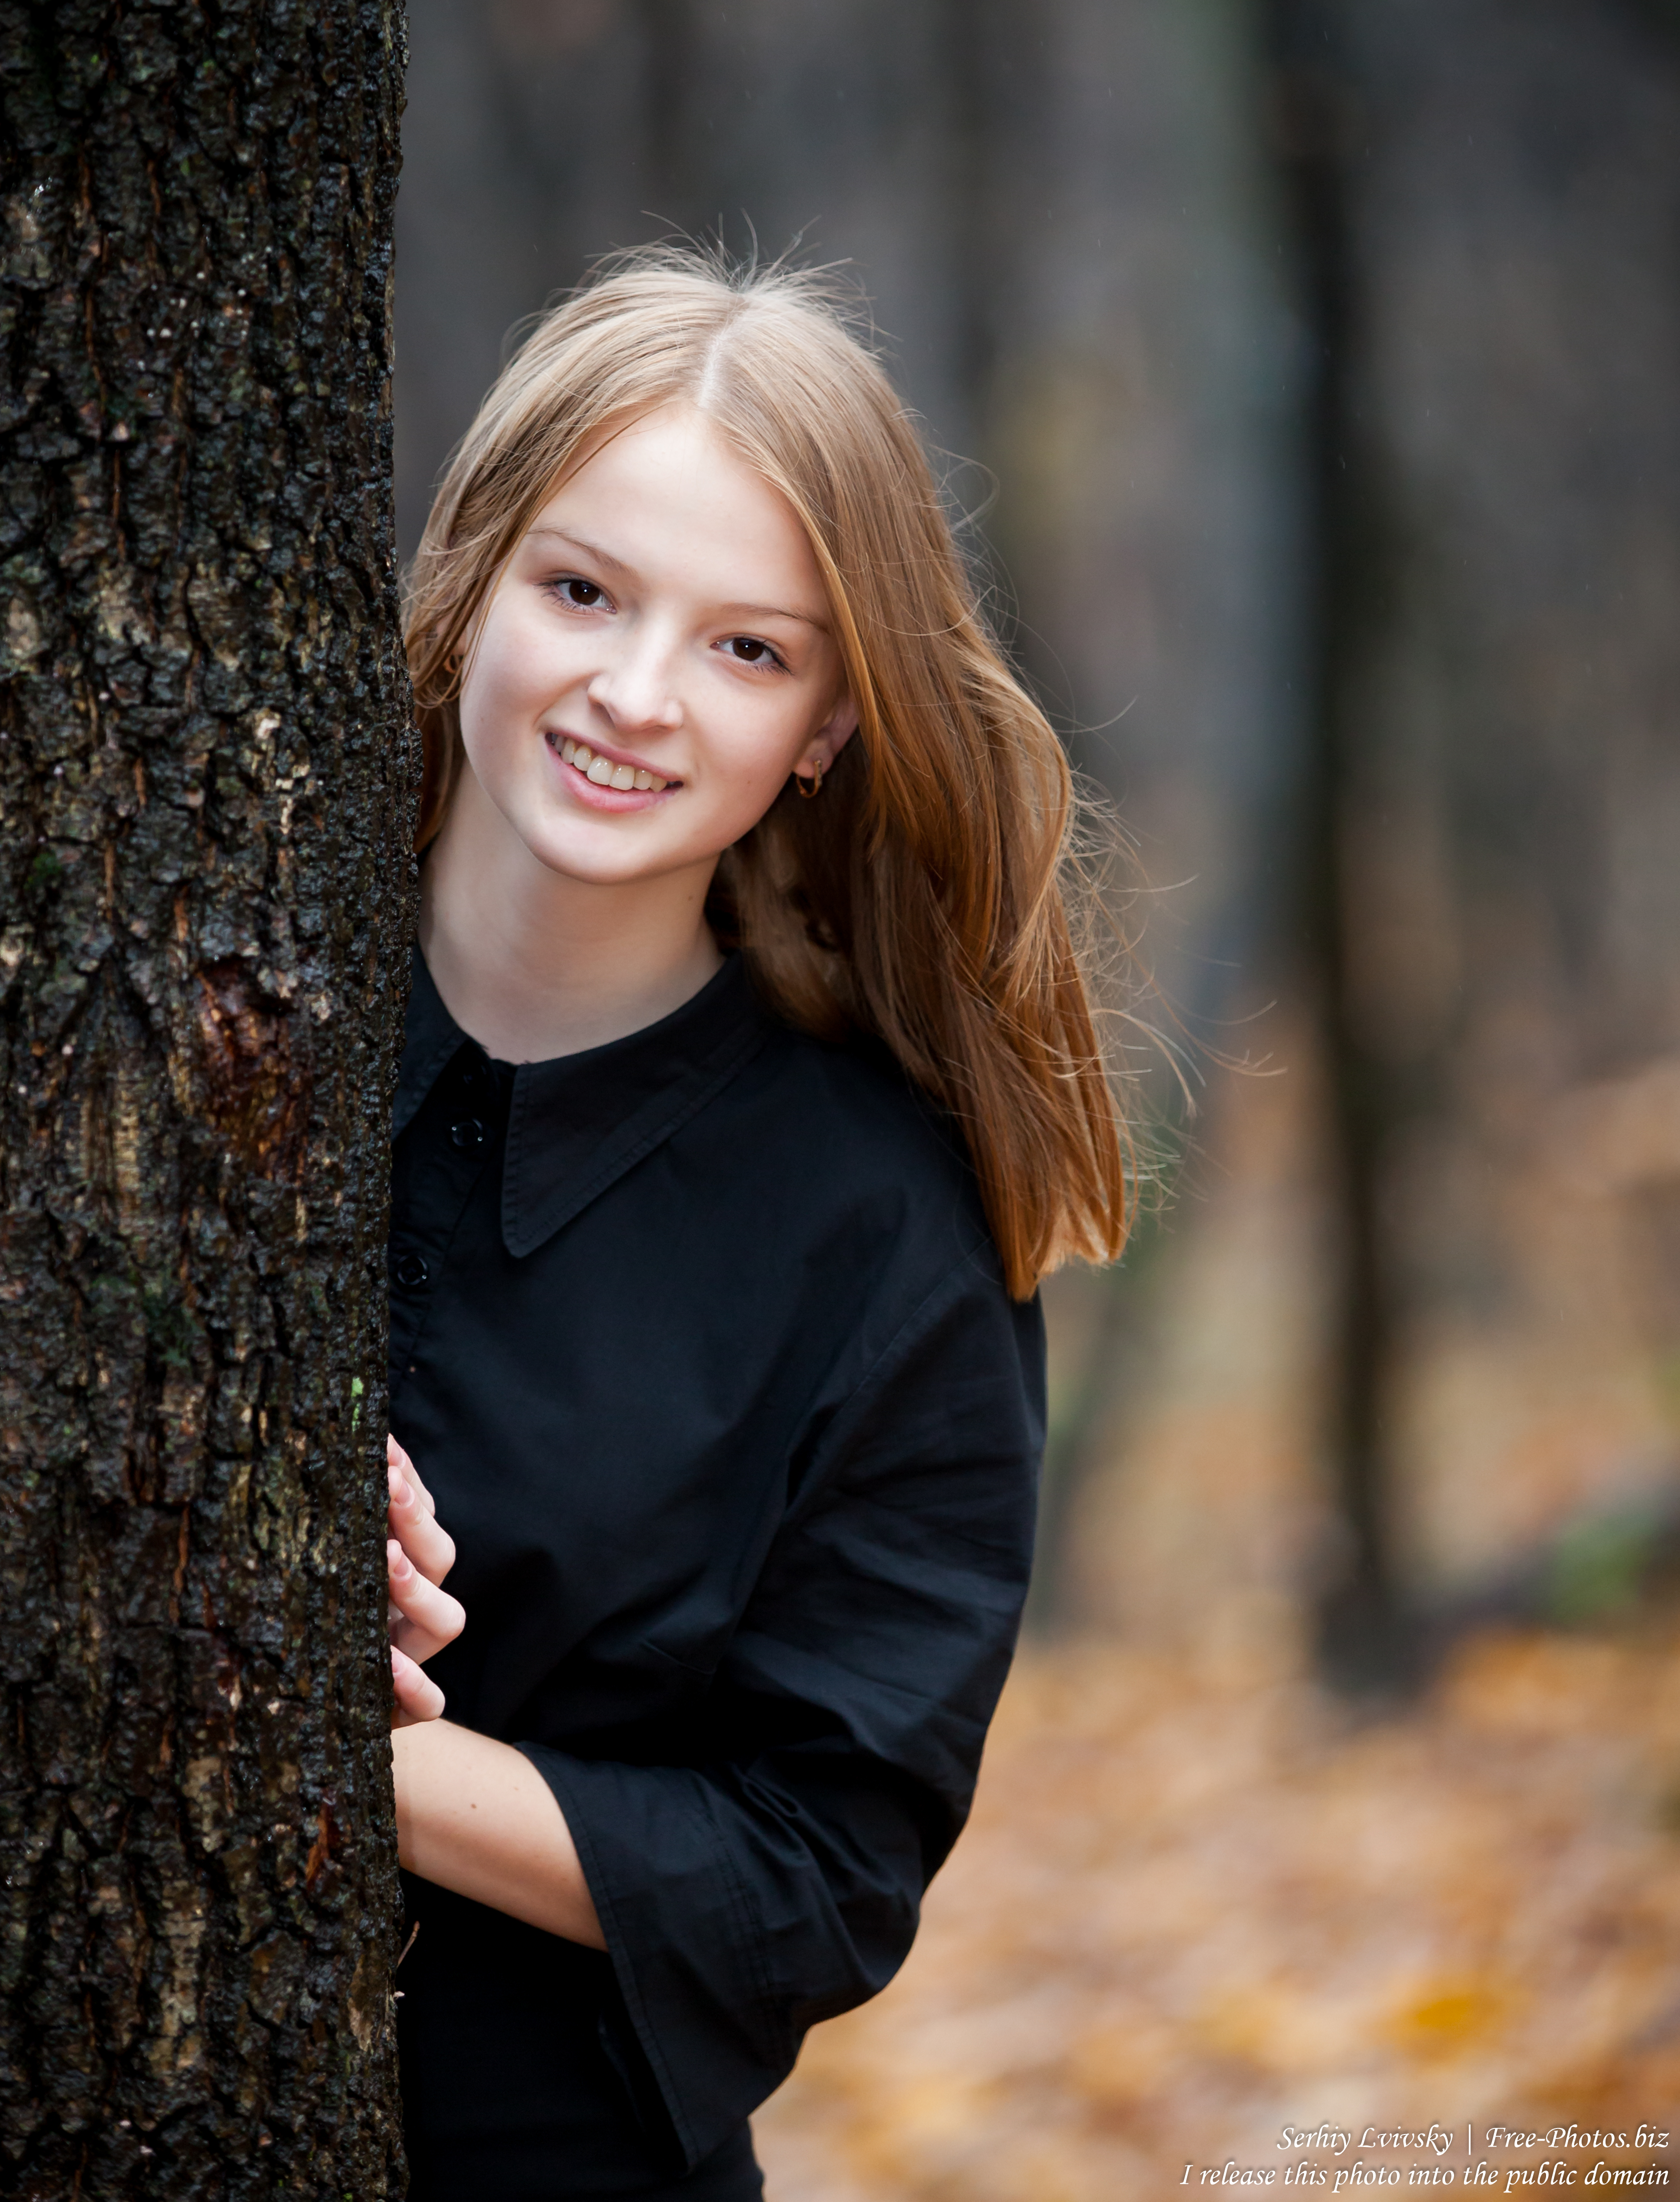 a 13-year-old Catholic girl photographed by Serhiy Lvivsky in November 2015, picture 1